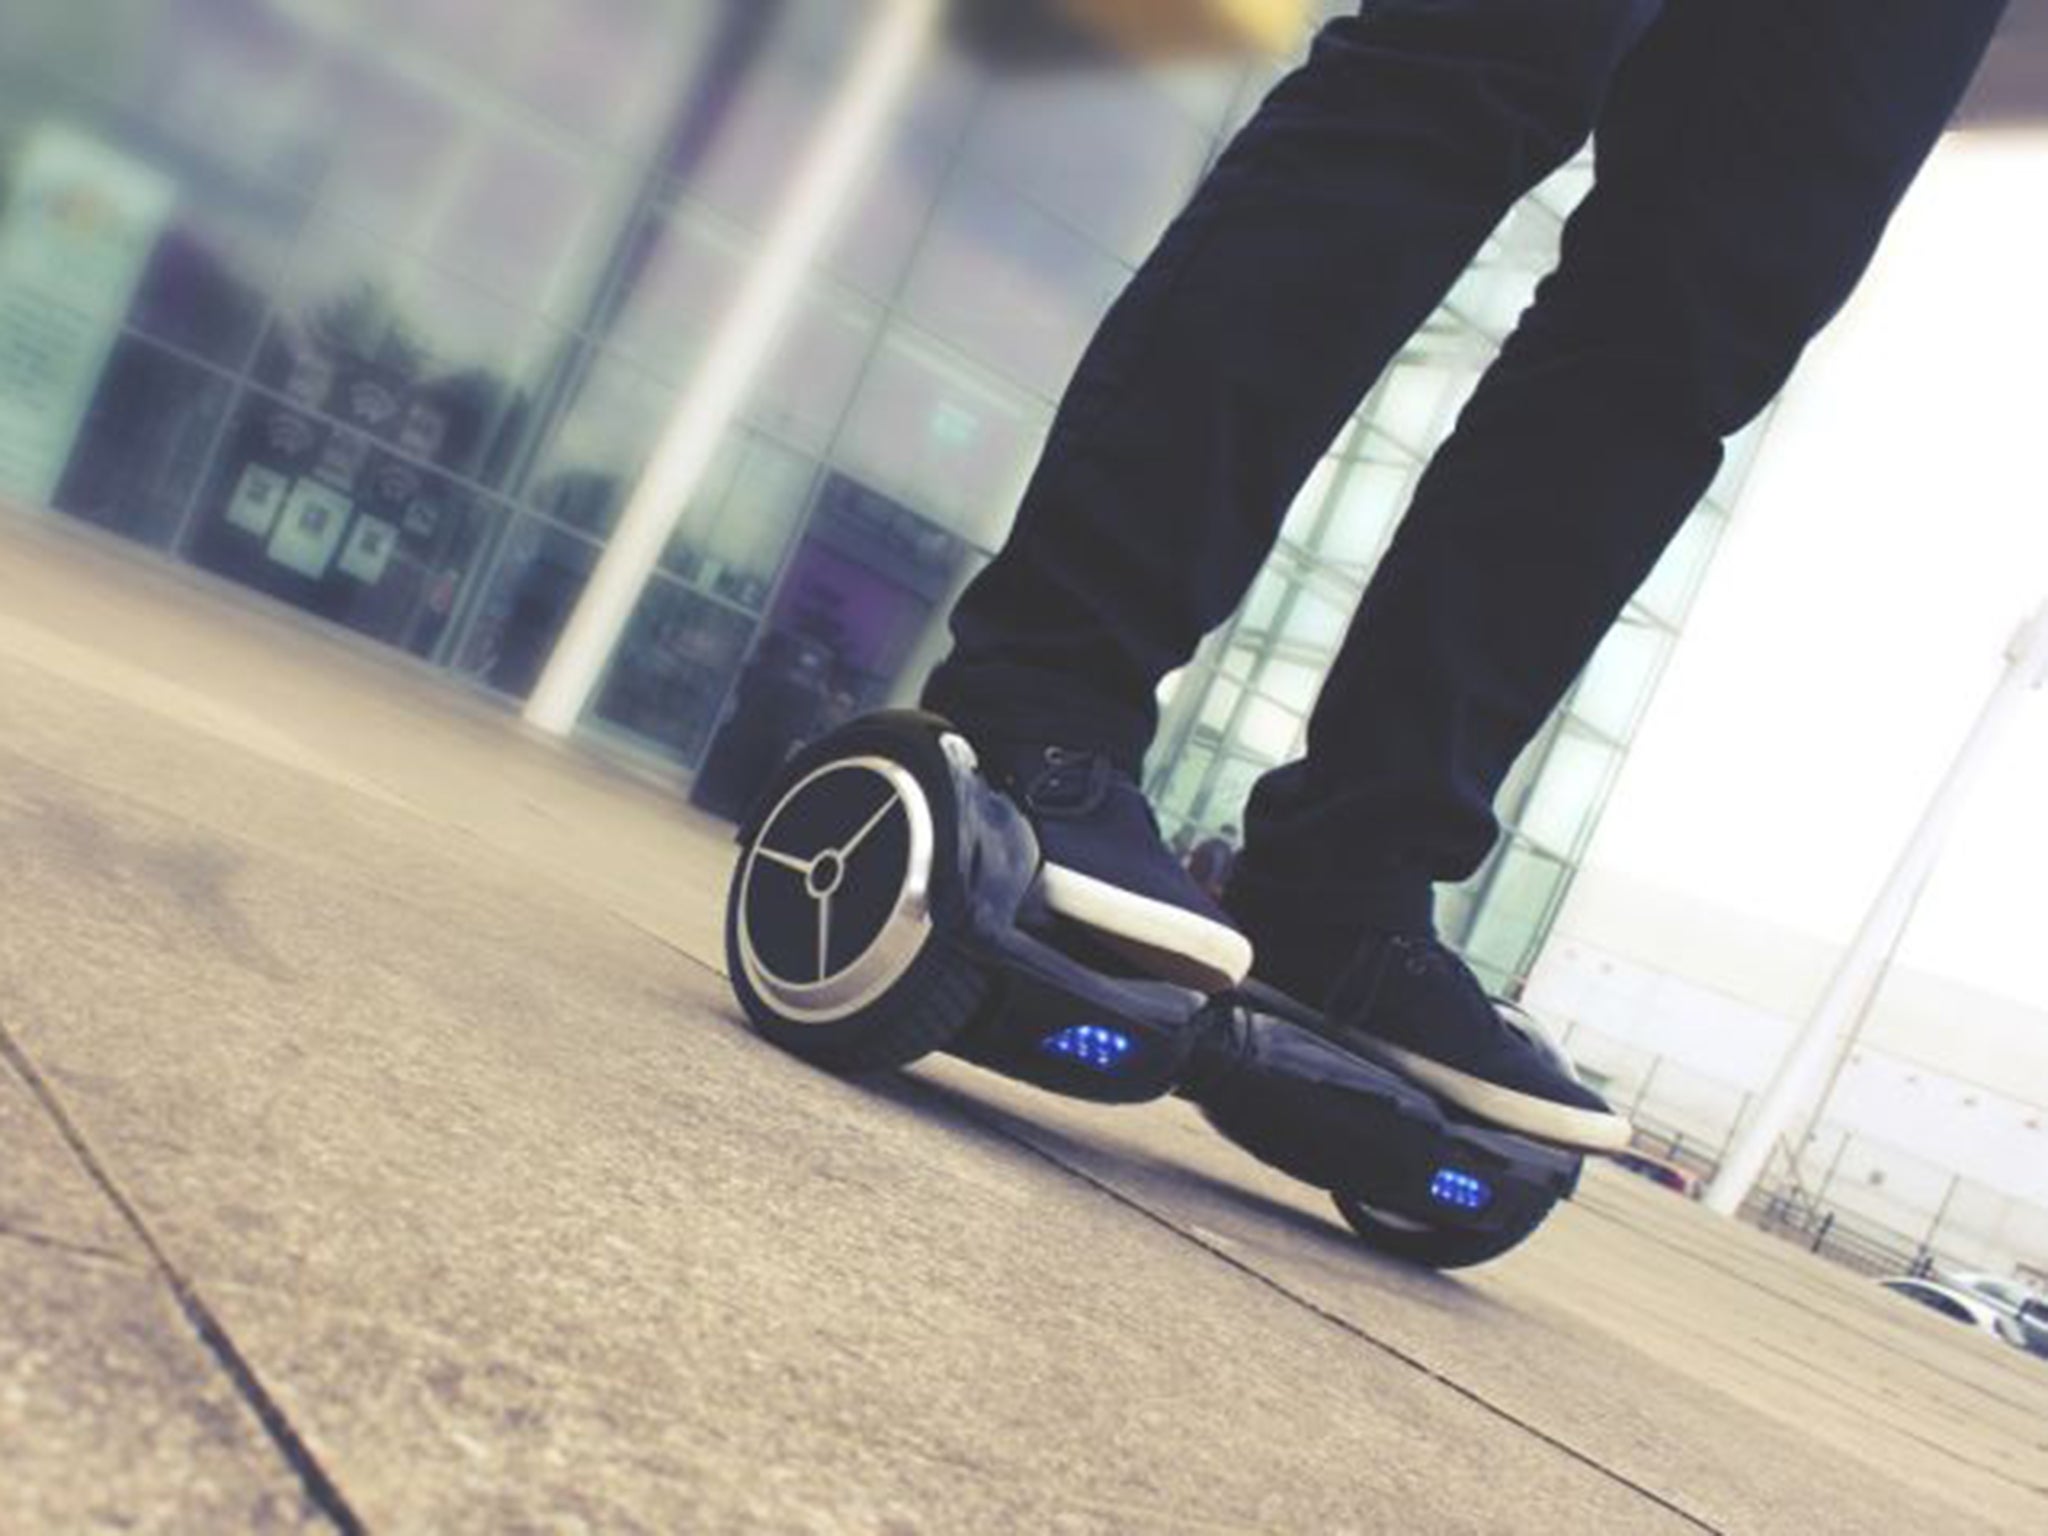 According to the Metropolitan Police, the so-called hoverboards violate the 1835 Highway Act that prohibits the driving of any vehicle “on the footway”